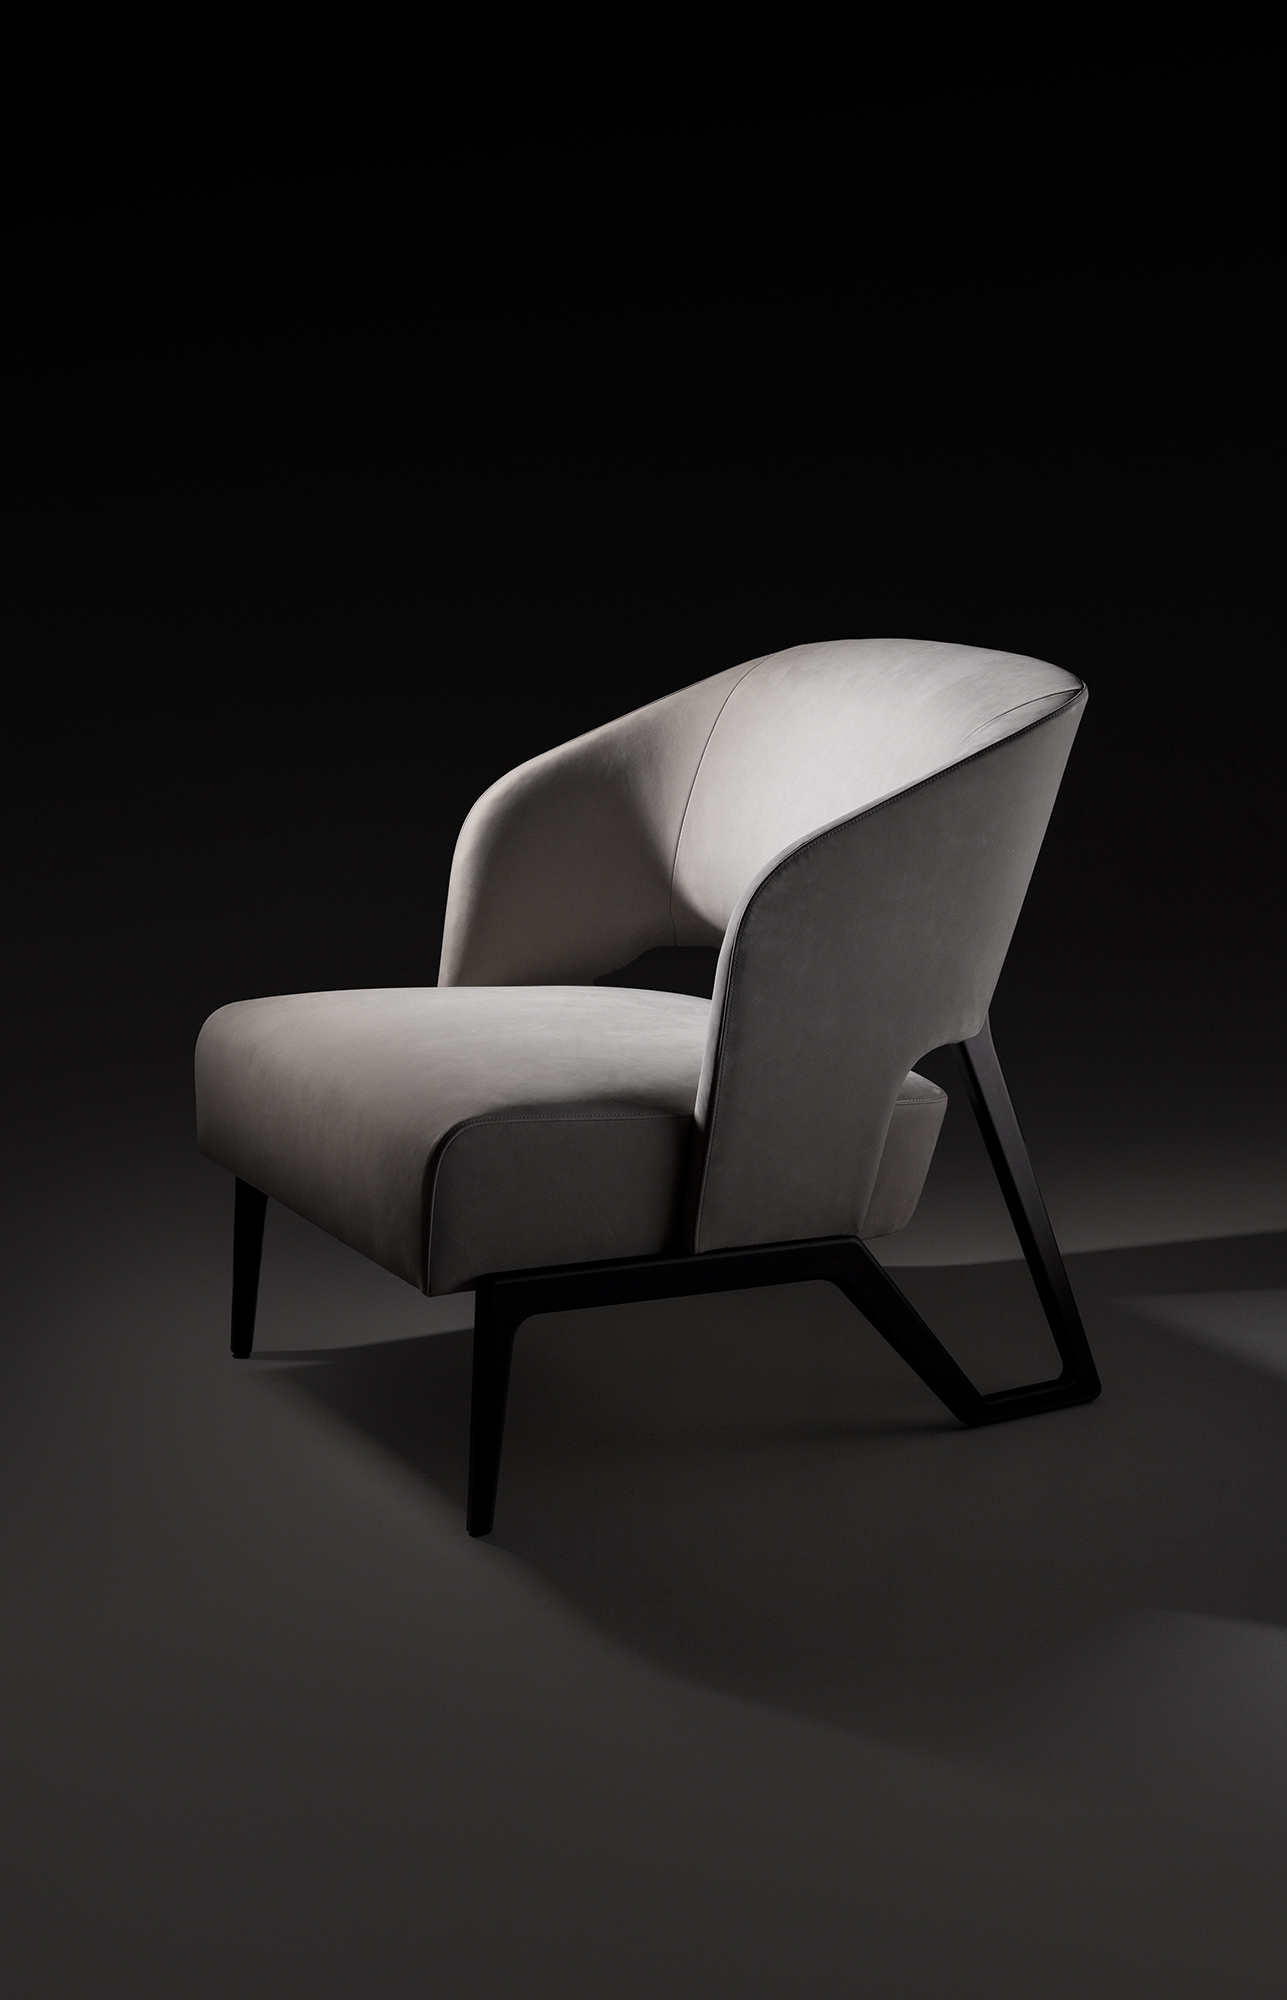 House-of-Hunt-Interior-Design-Chicago-Product-Chair-Mobile